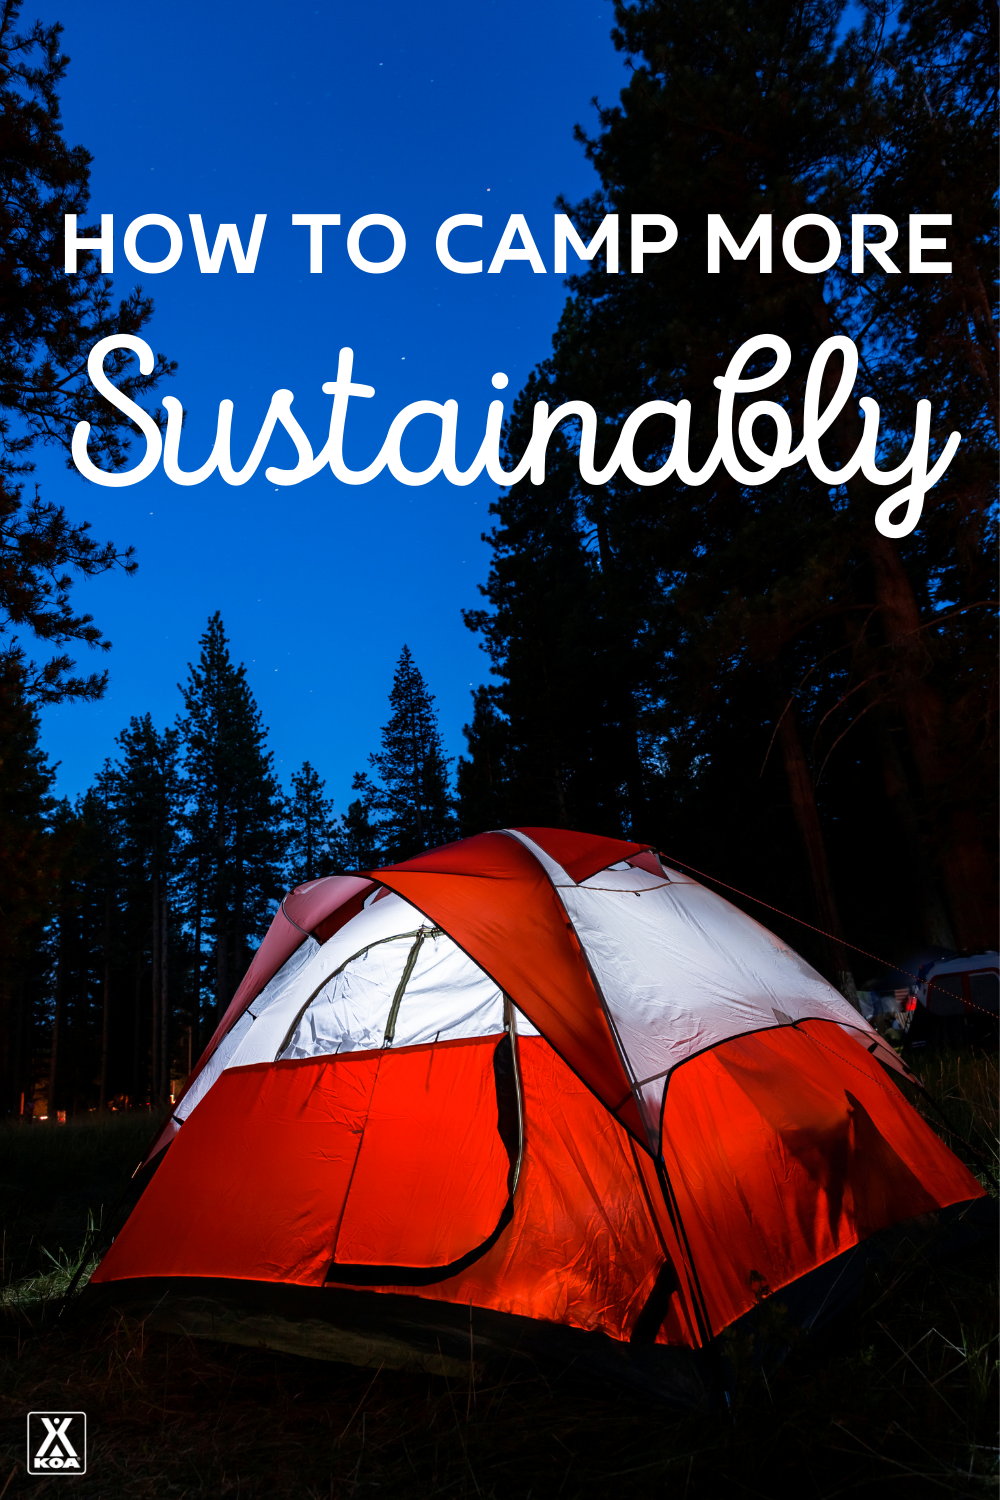 When you're out in nature enjoying a camping trip it's important to keep the environment in mind. Here are 7 ways to camp more sustainably when out on your next adventure.